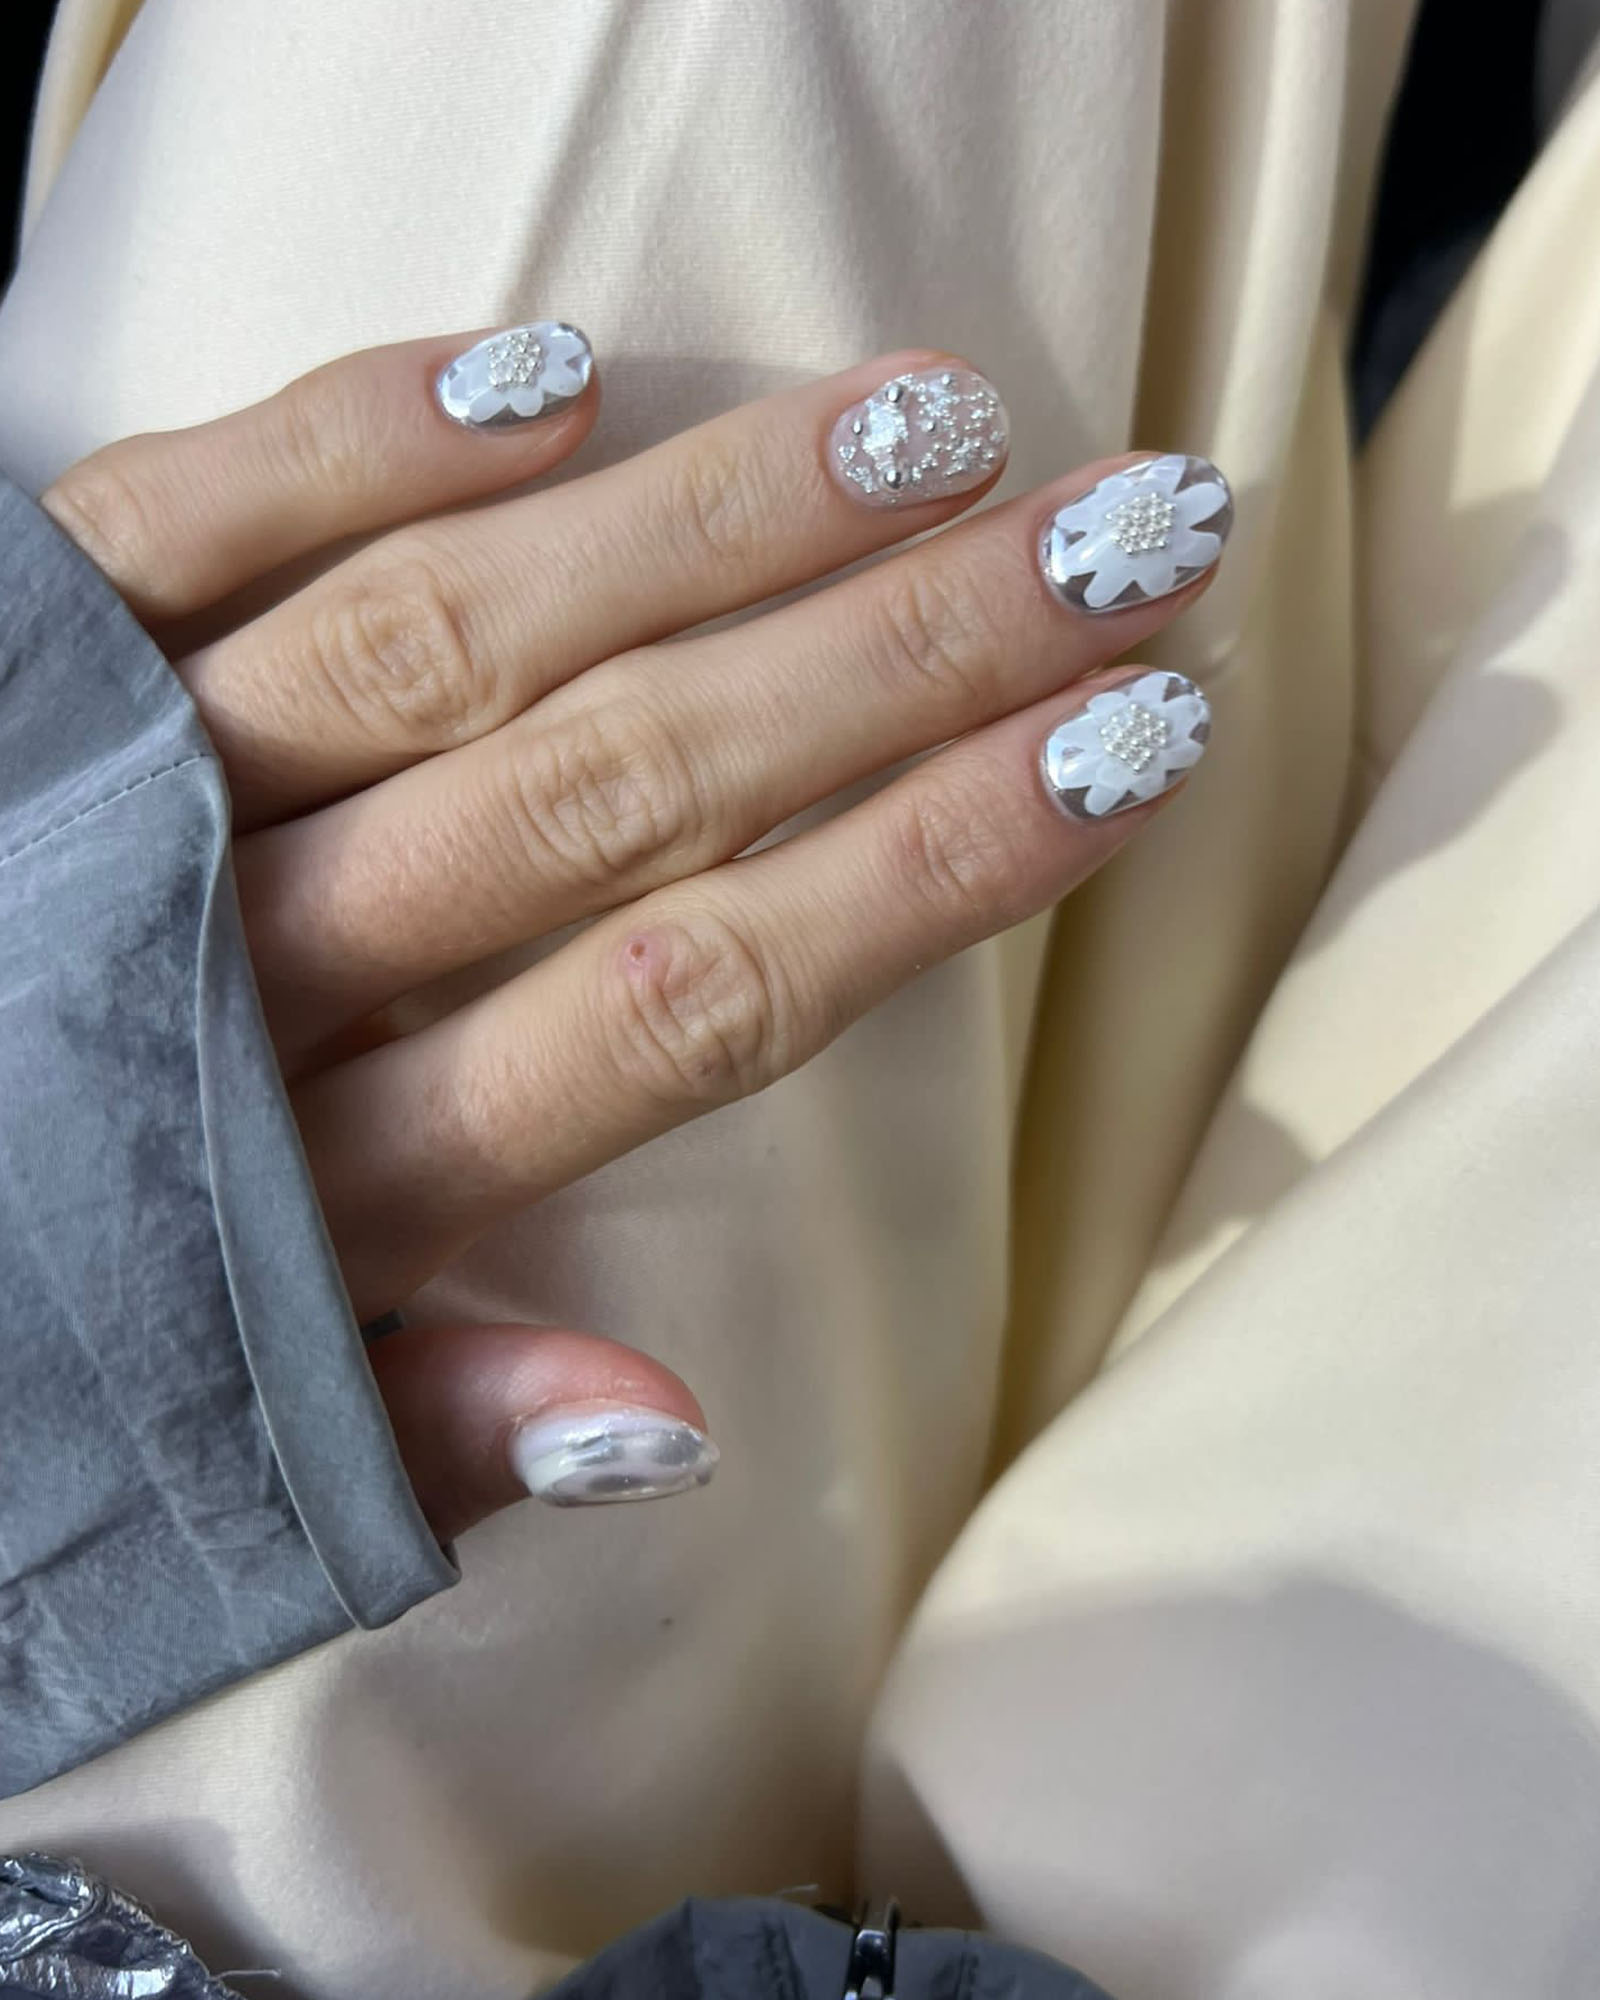 Law’s pearl-adorned nails at the Here:re nail salon.